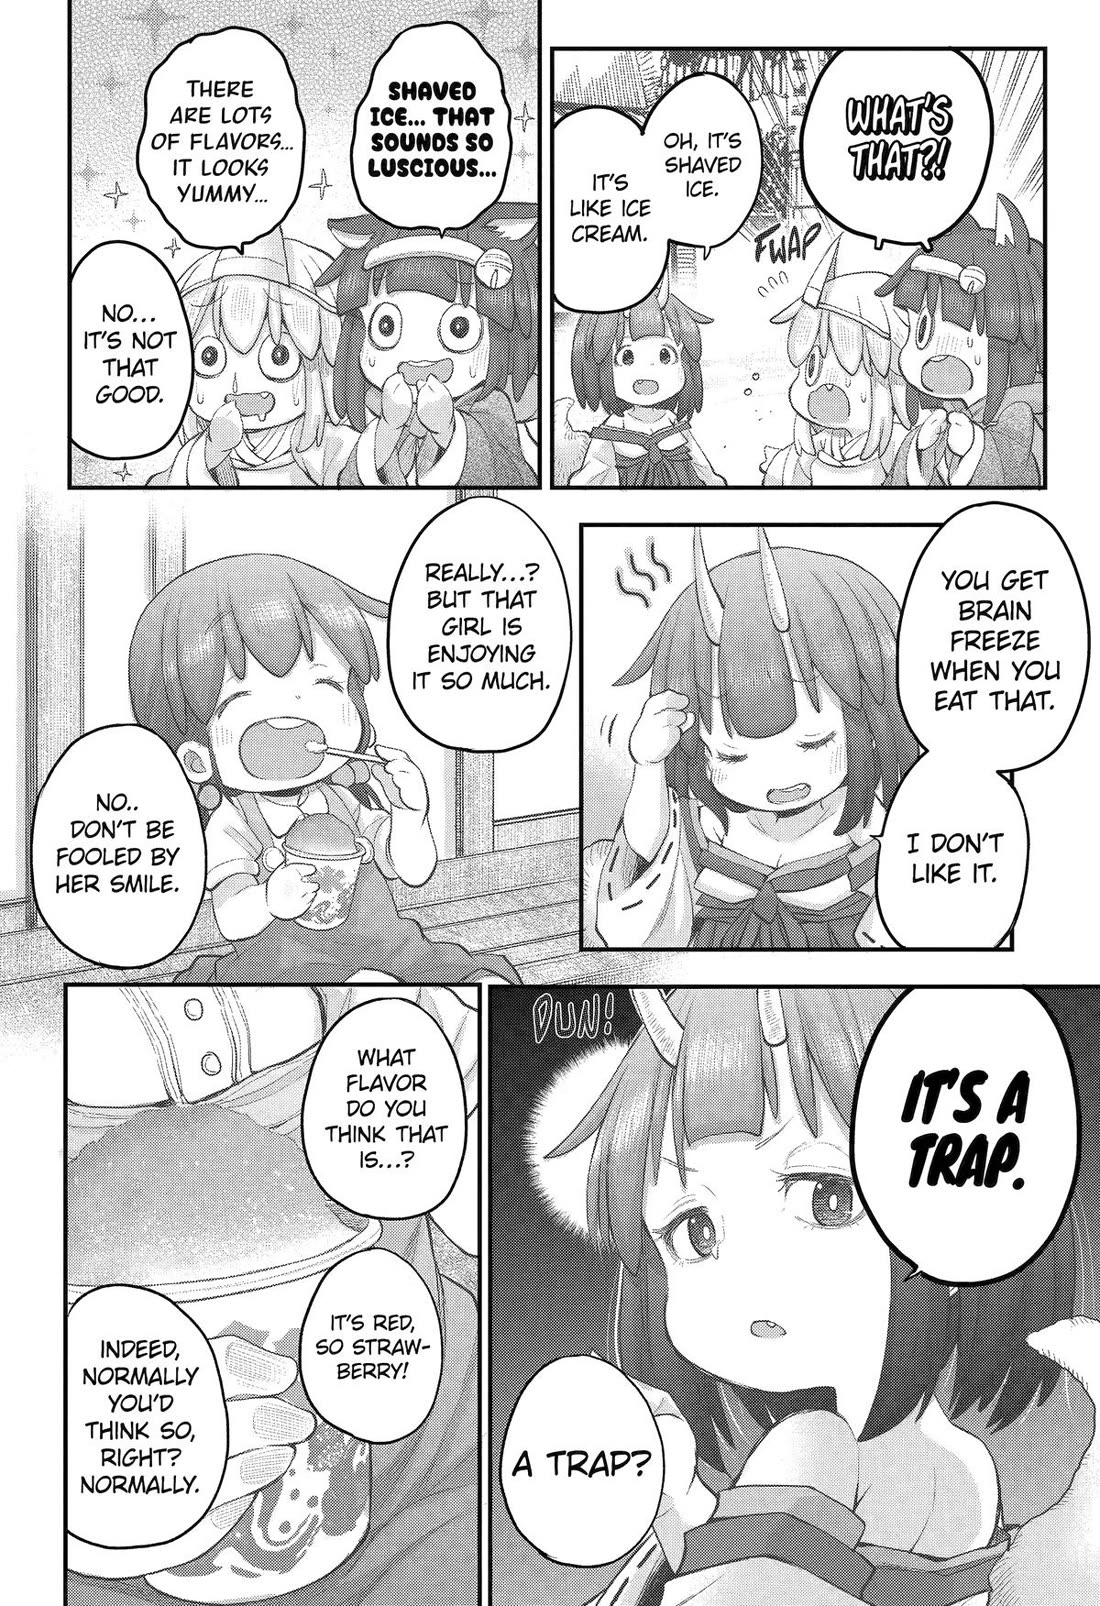 Ms. Corporate Slave Wants to be Healed by a Loli Spirit - chapter 111 - #2